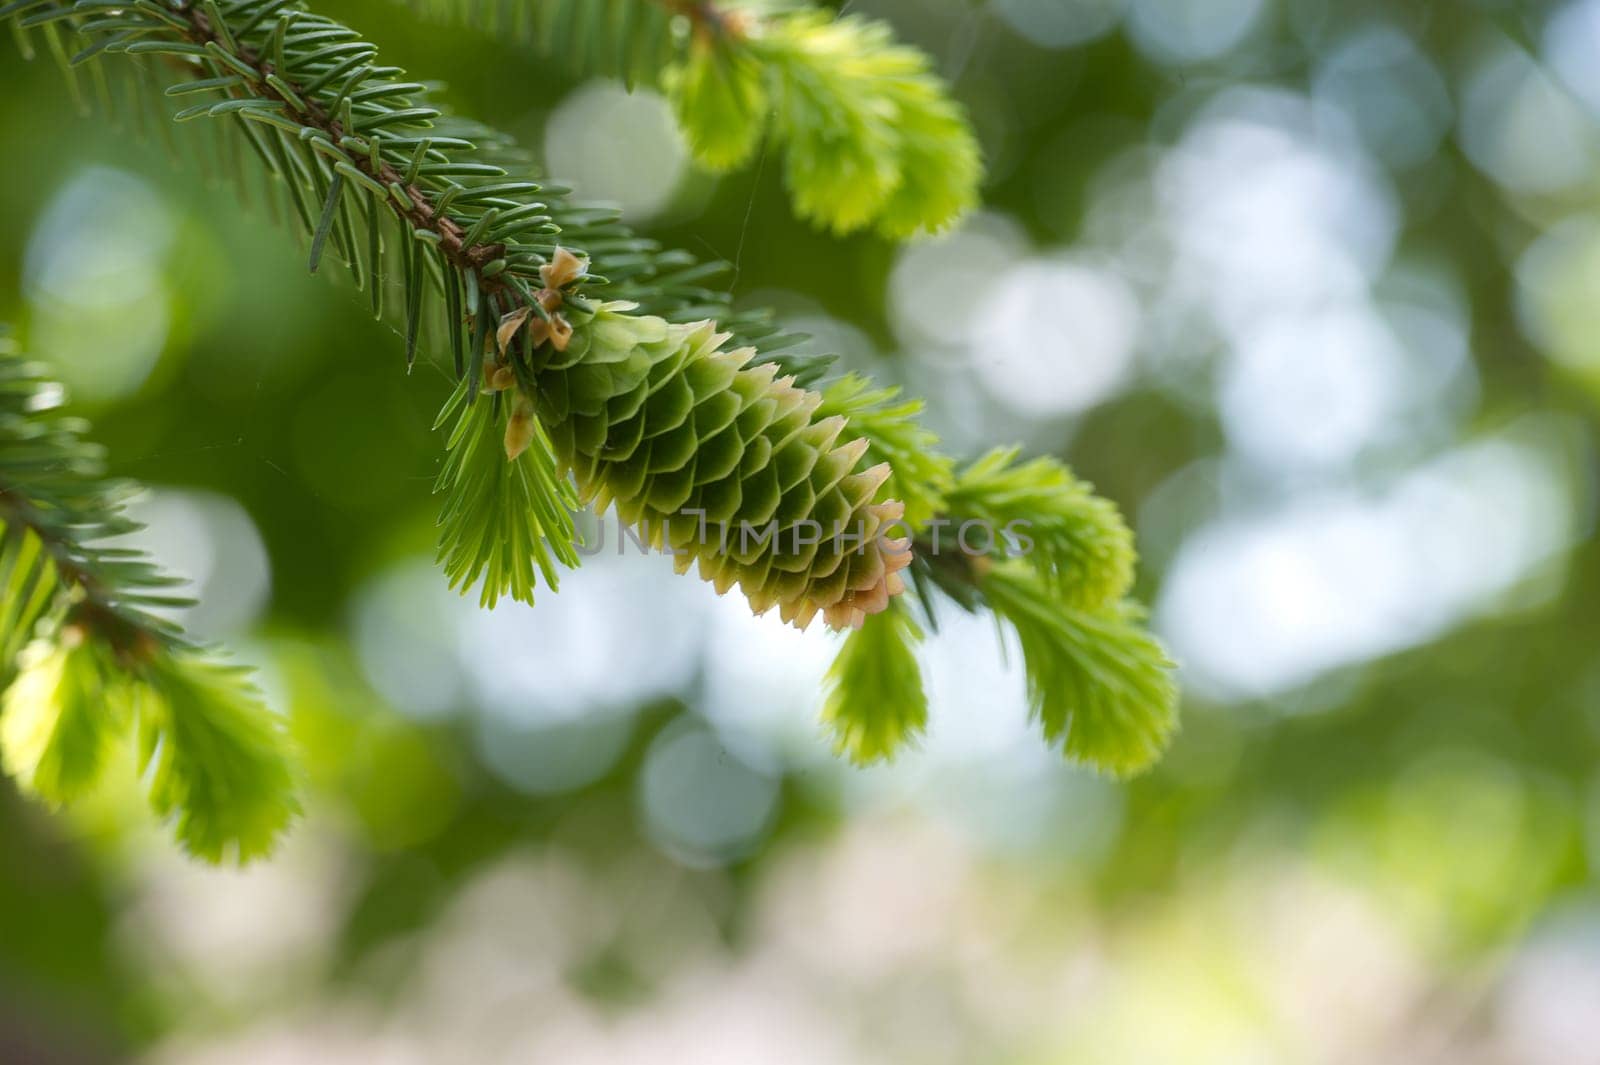 Green fir cone on a fir tree branch, young fir cone showing a green hue with hints of pink at its tips over blurred background with light spots